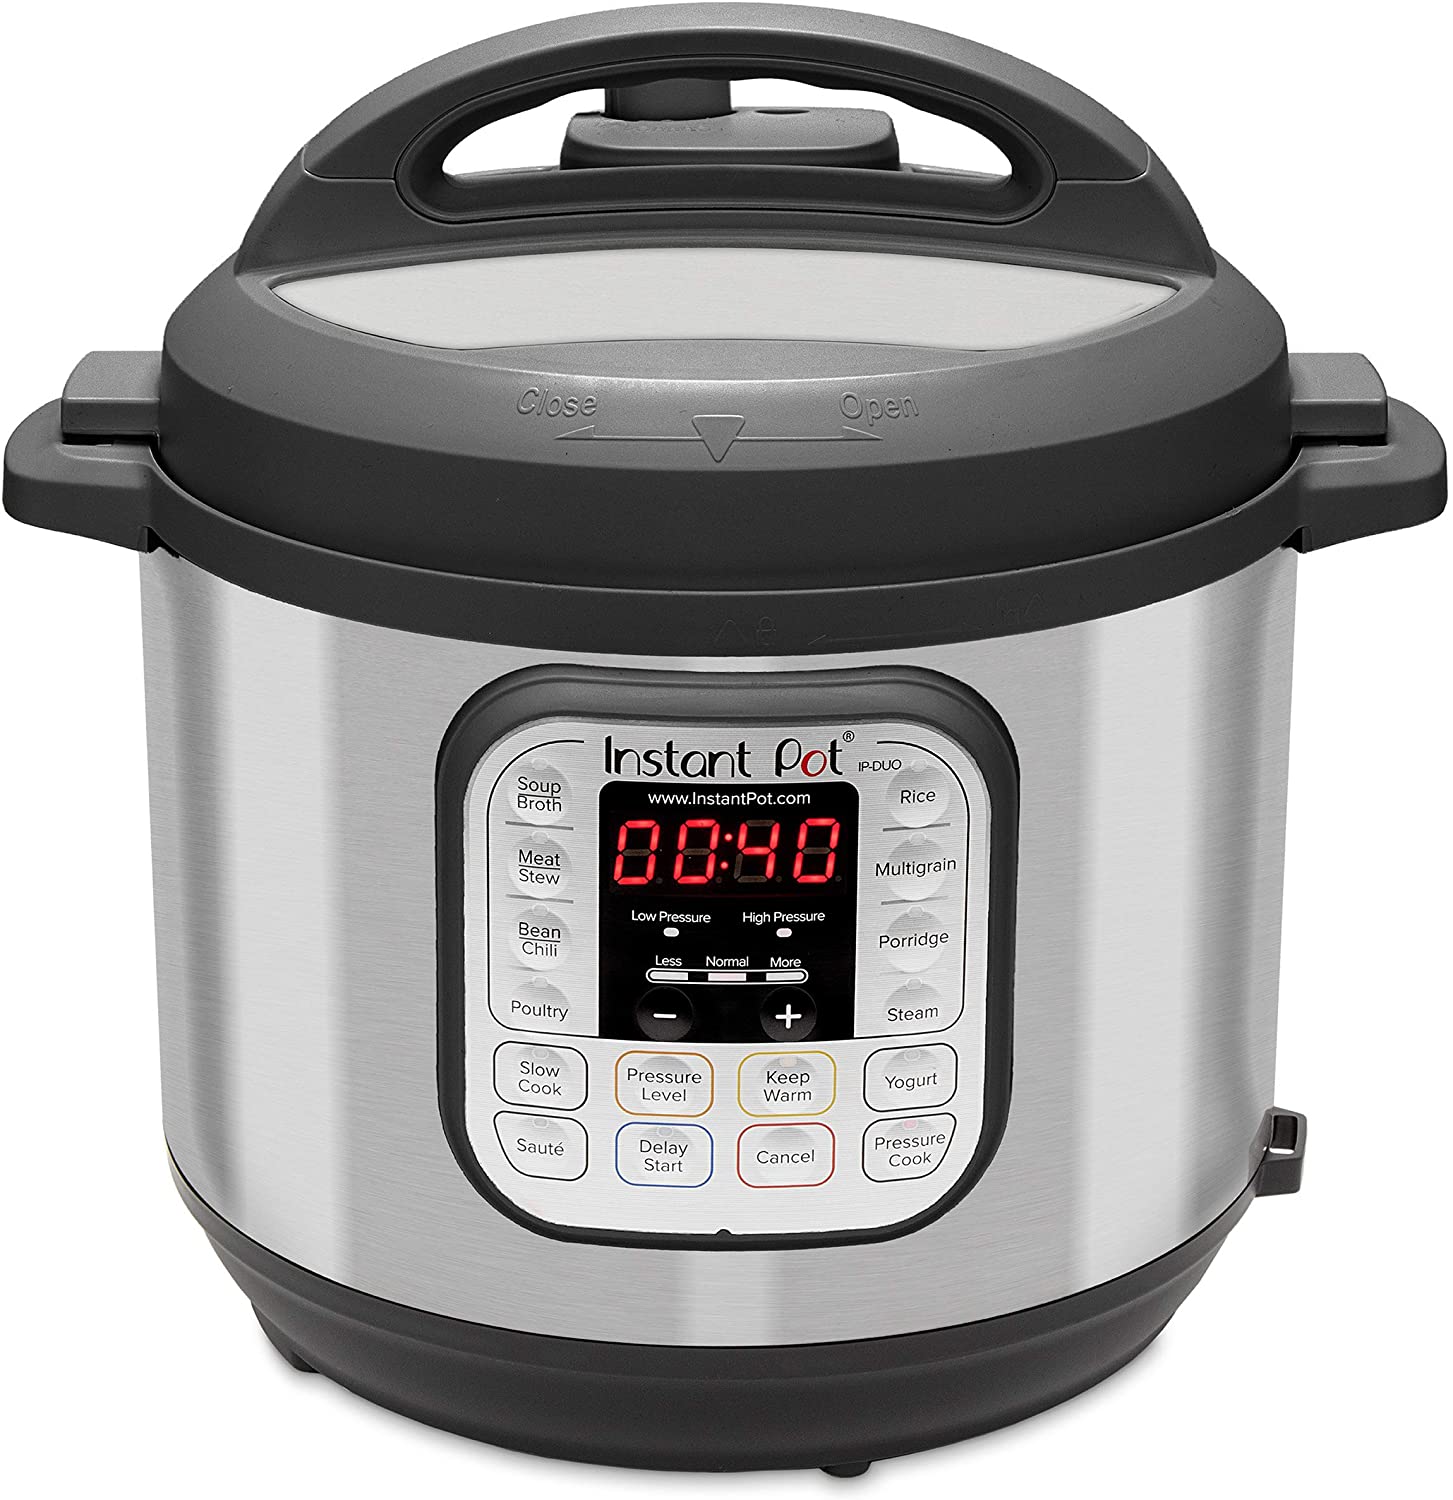 Instant Perrrt! Premium Steamer Basket Eggs Stainless Steel & Dishwasher Safe Meats & More Perfectly Prepares Vegetables Instant Pot Pressure Cooker Accessory 3 Quart 